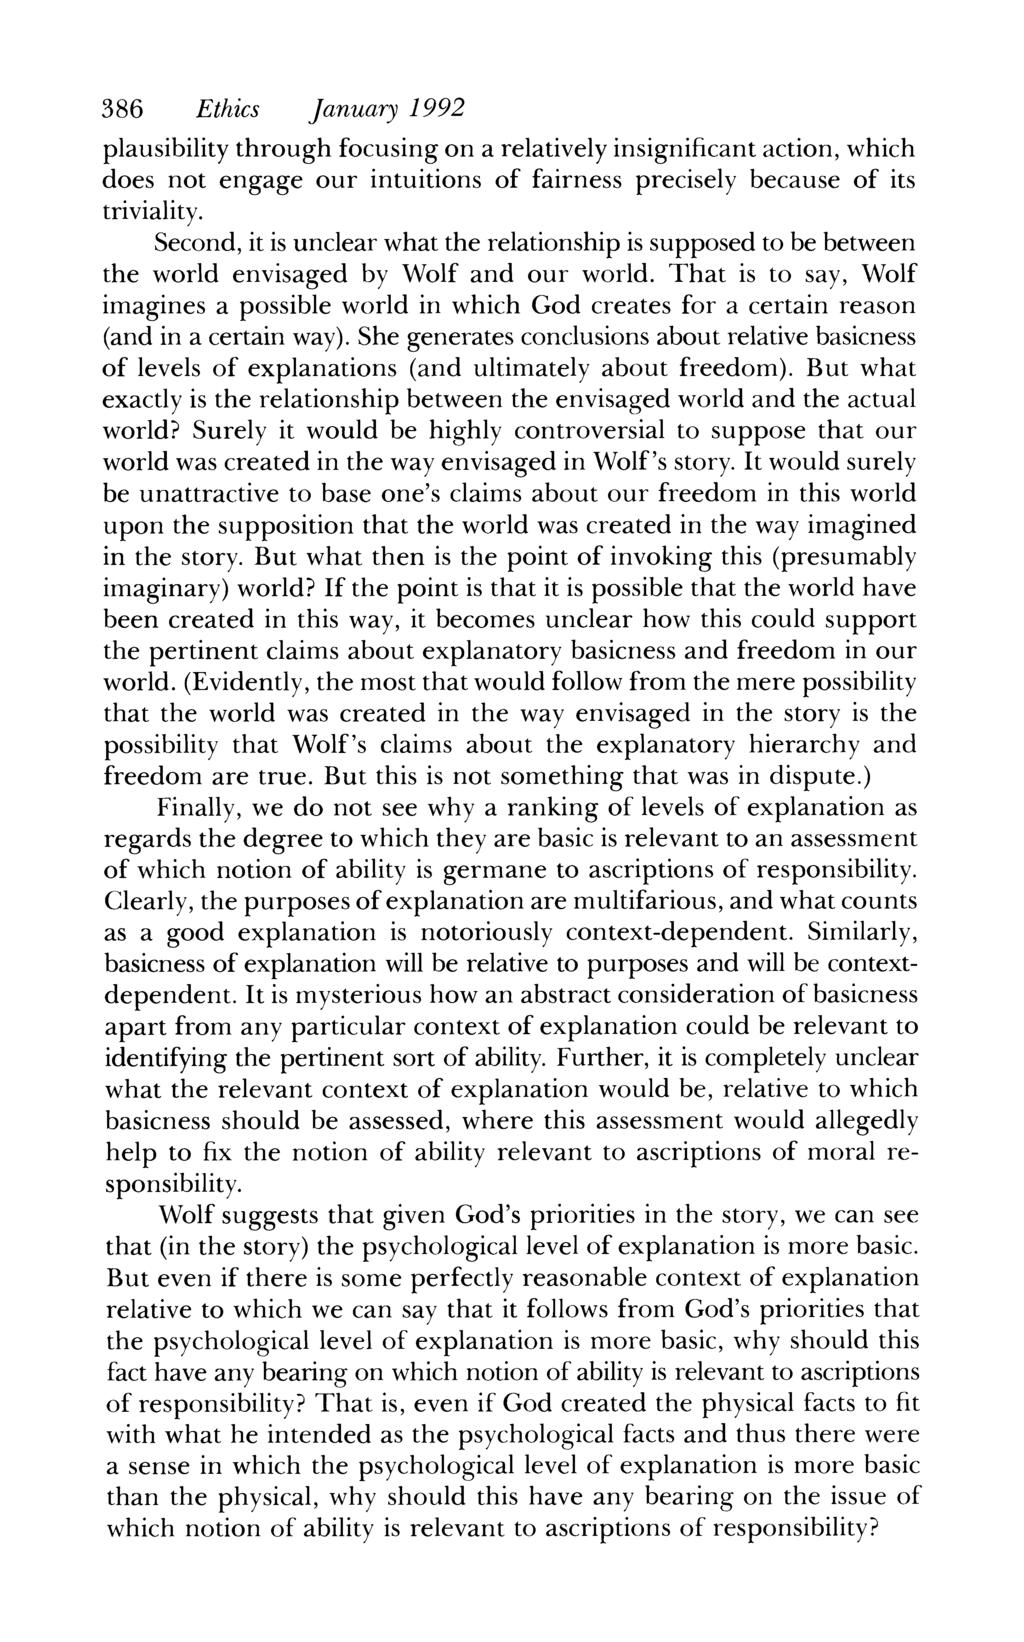 386 Ethics January 1992 plausibility through focusing on a relatively insignificant action, which does not engage our intuitions of fairness precisely because of its triviality.